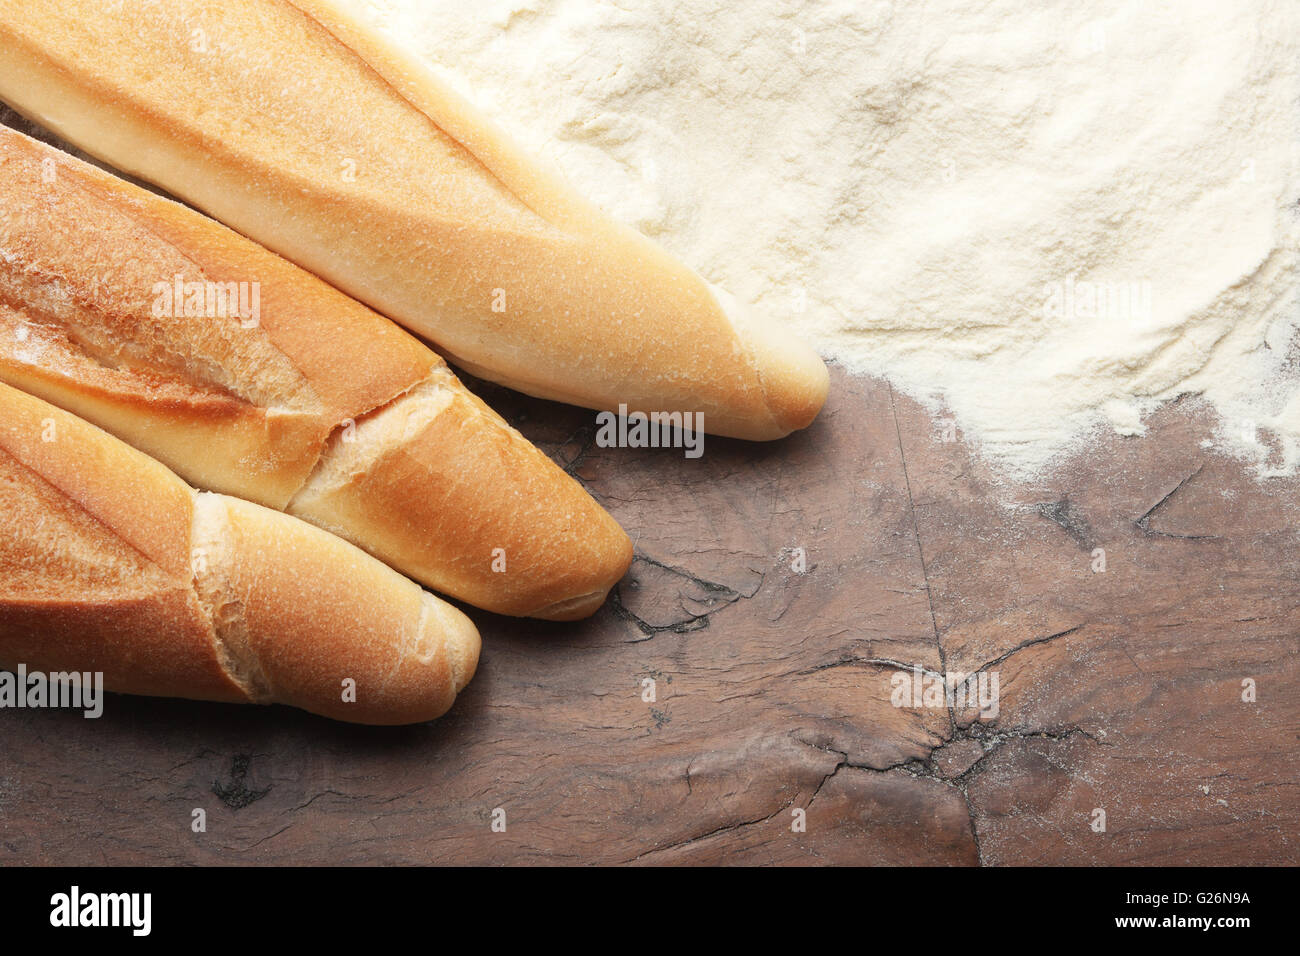 Bread and flour on a wooden table Stock Photo